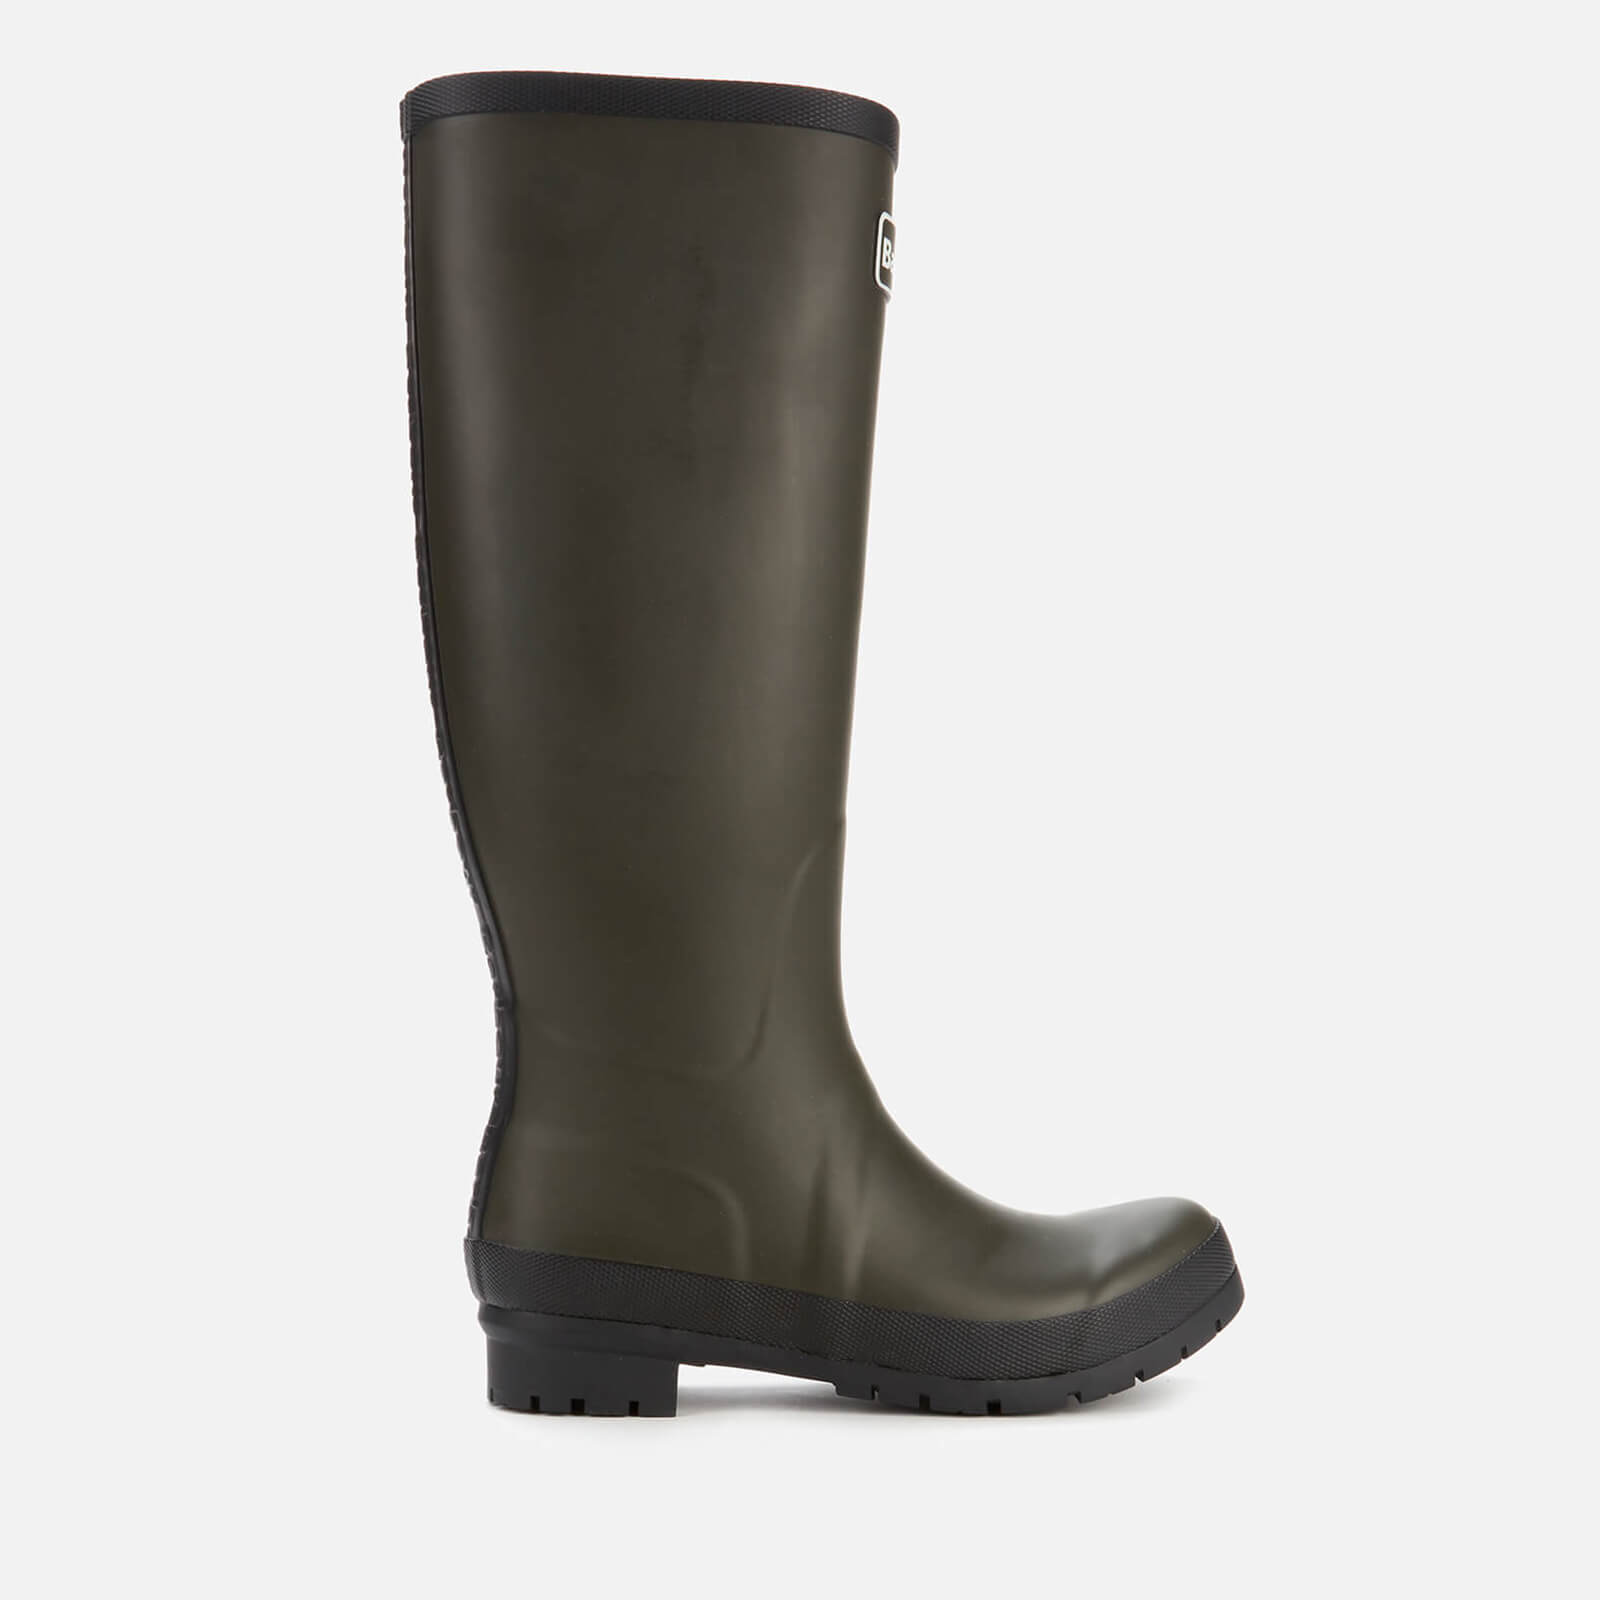 Barbour Women’s Abbey Tall Wellies - Olive